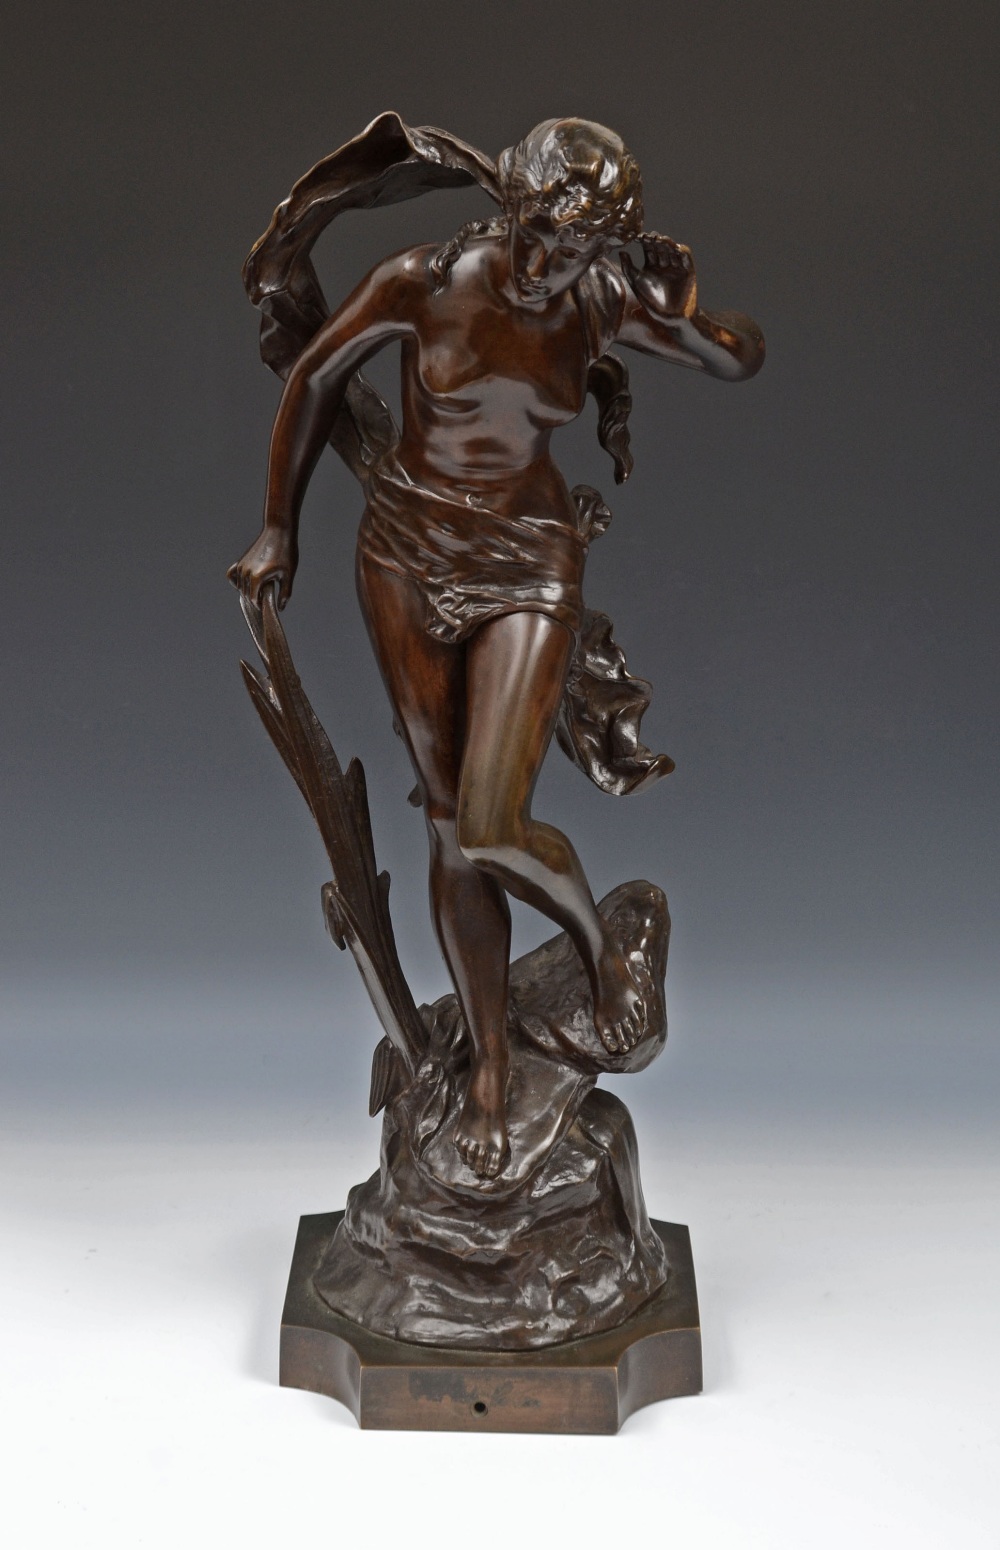 Edouard Drouot (1859 - 1945), a brown patinated bronze, of a scantily glad nymph, listening